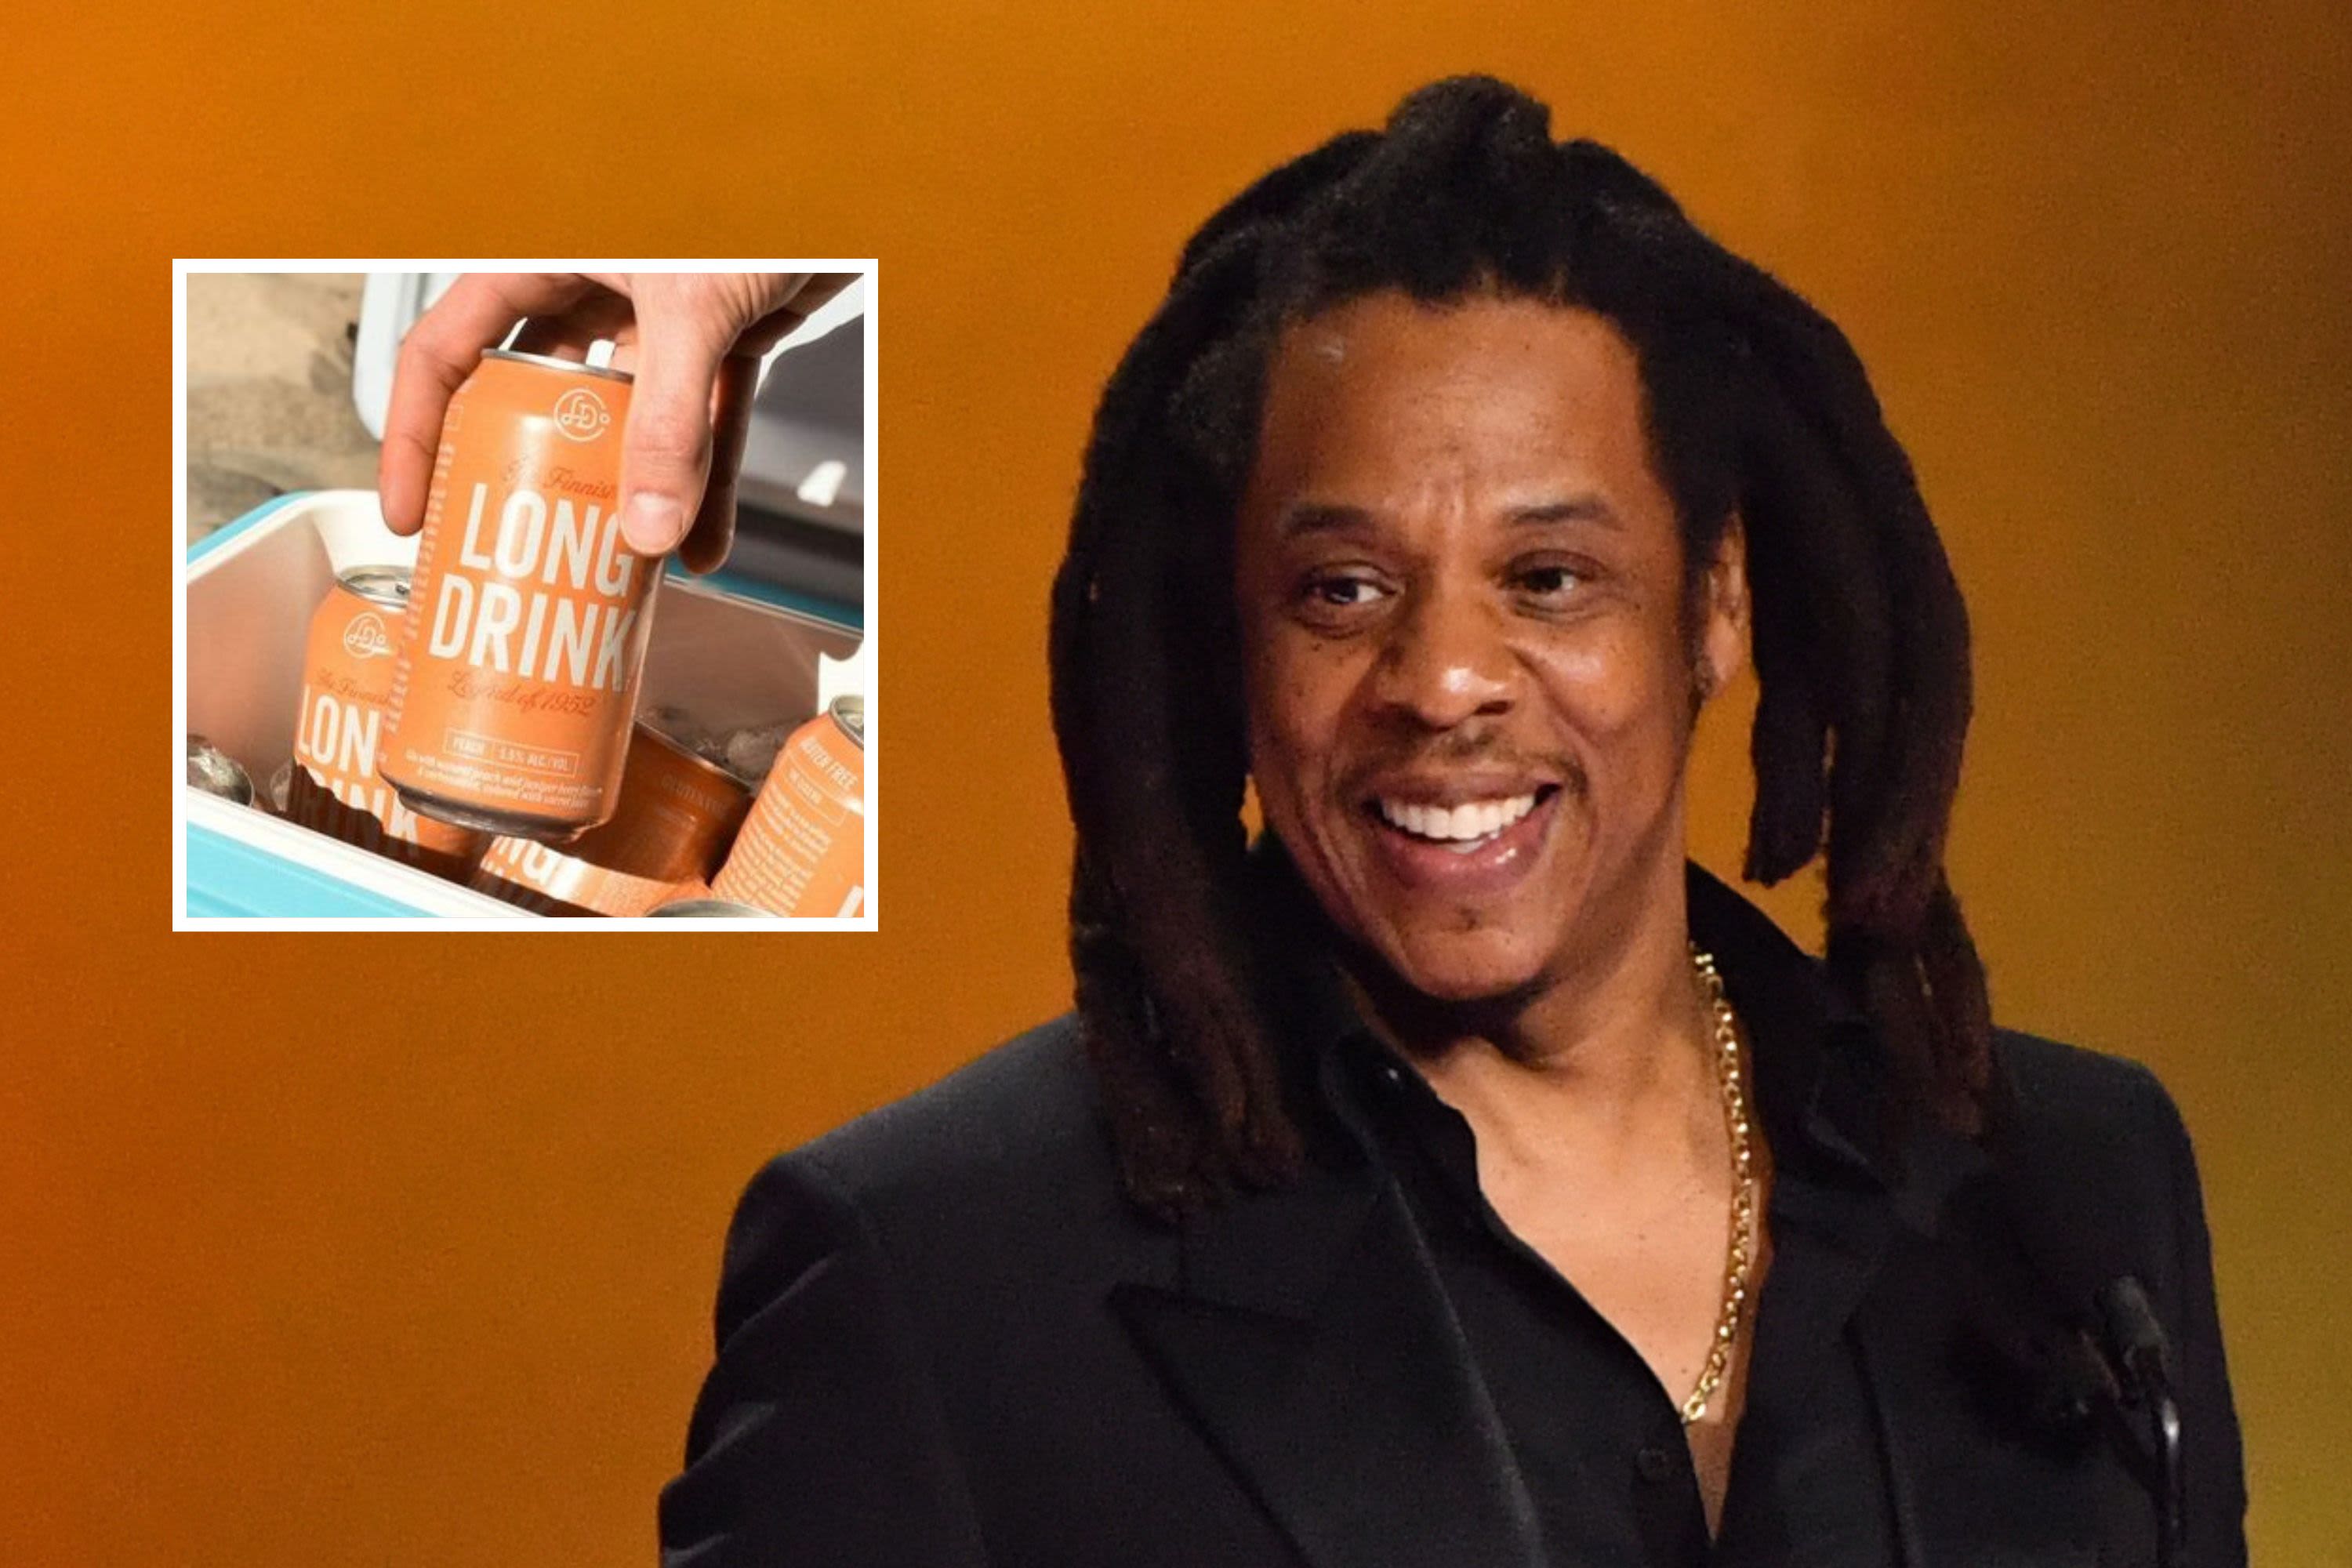 The Canned Cocktail Backed By Jay-Z That's Taking America By Storm